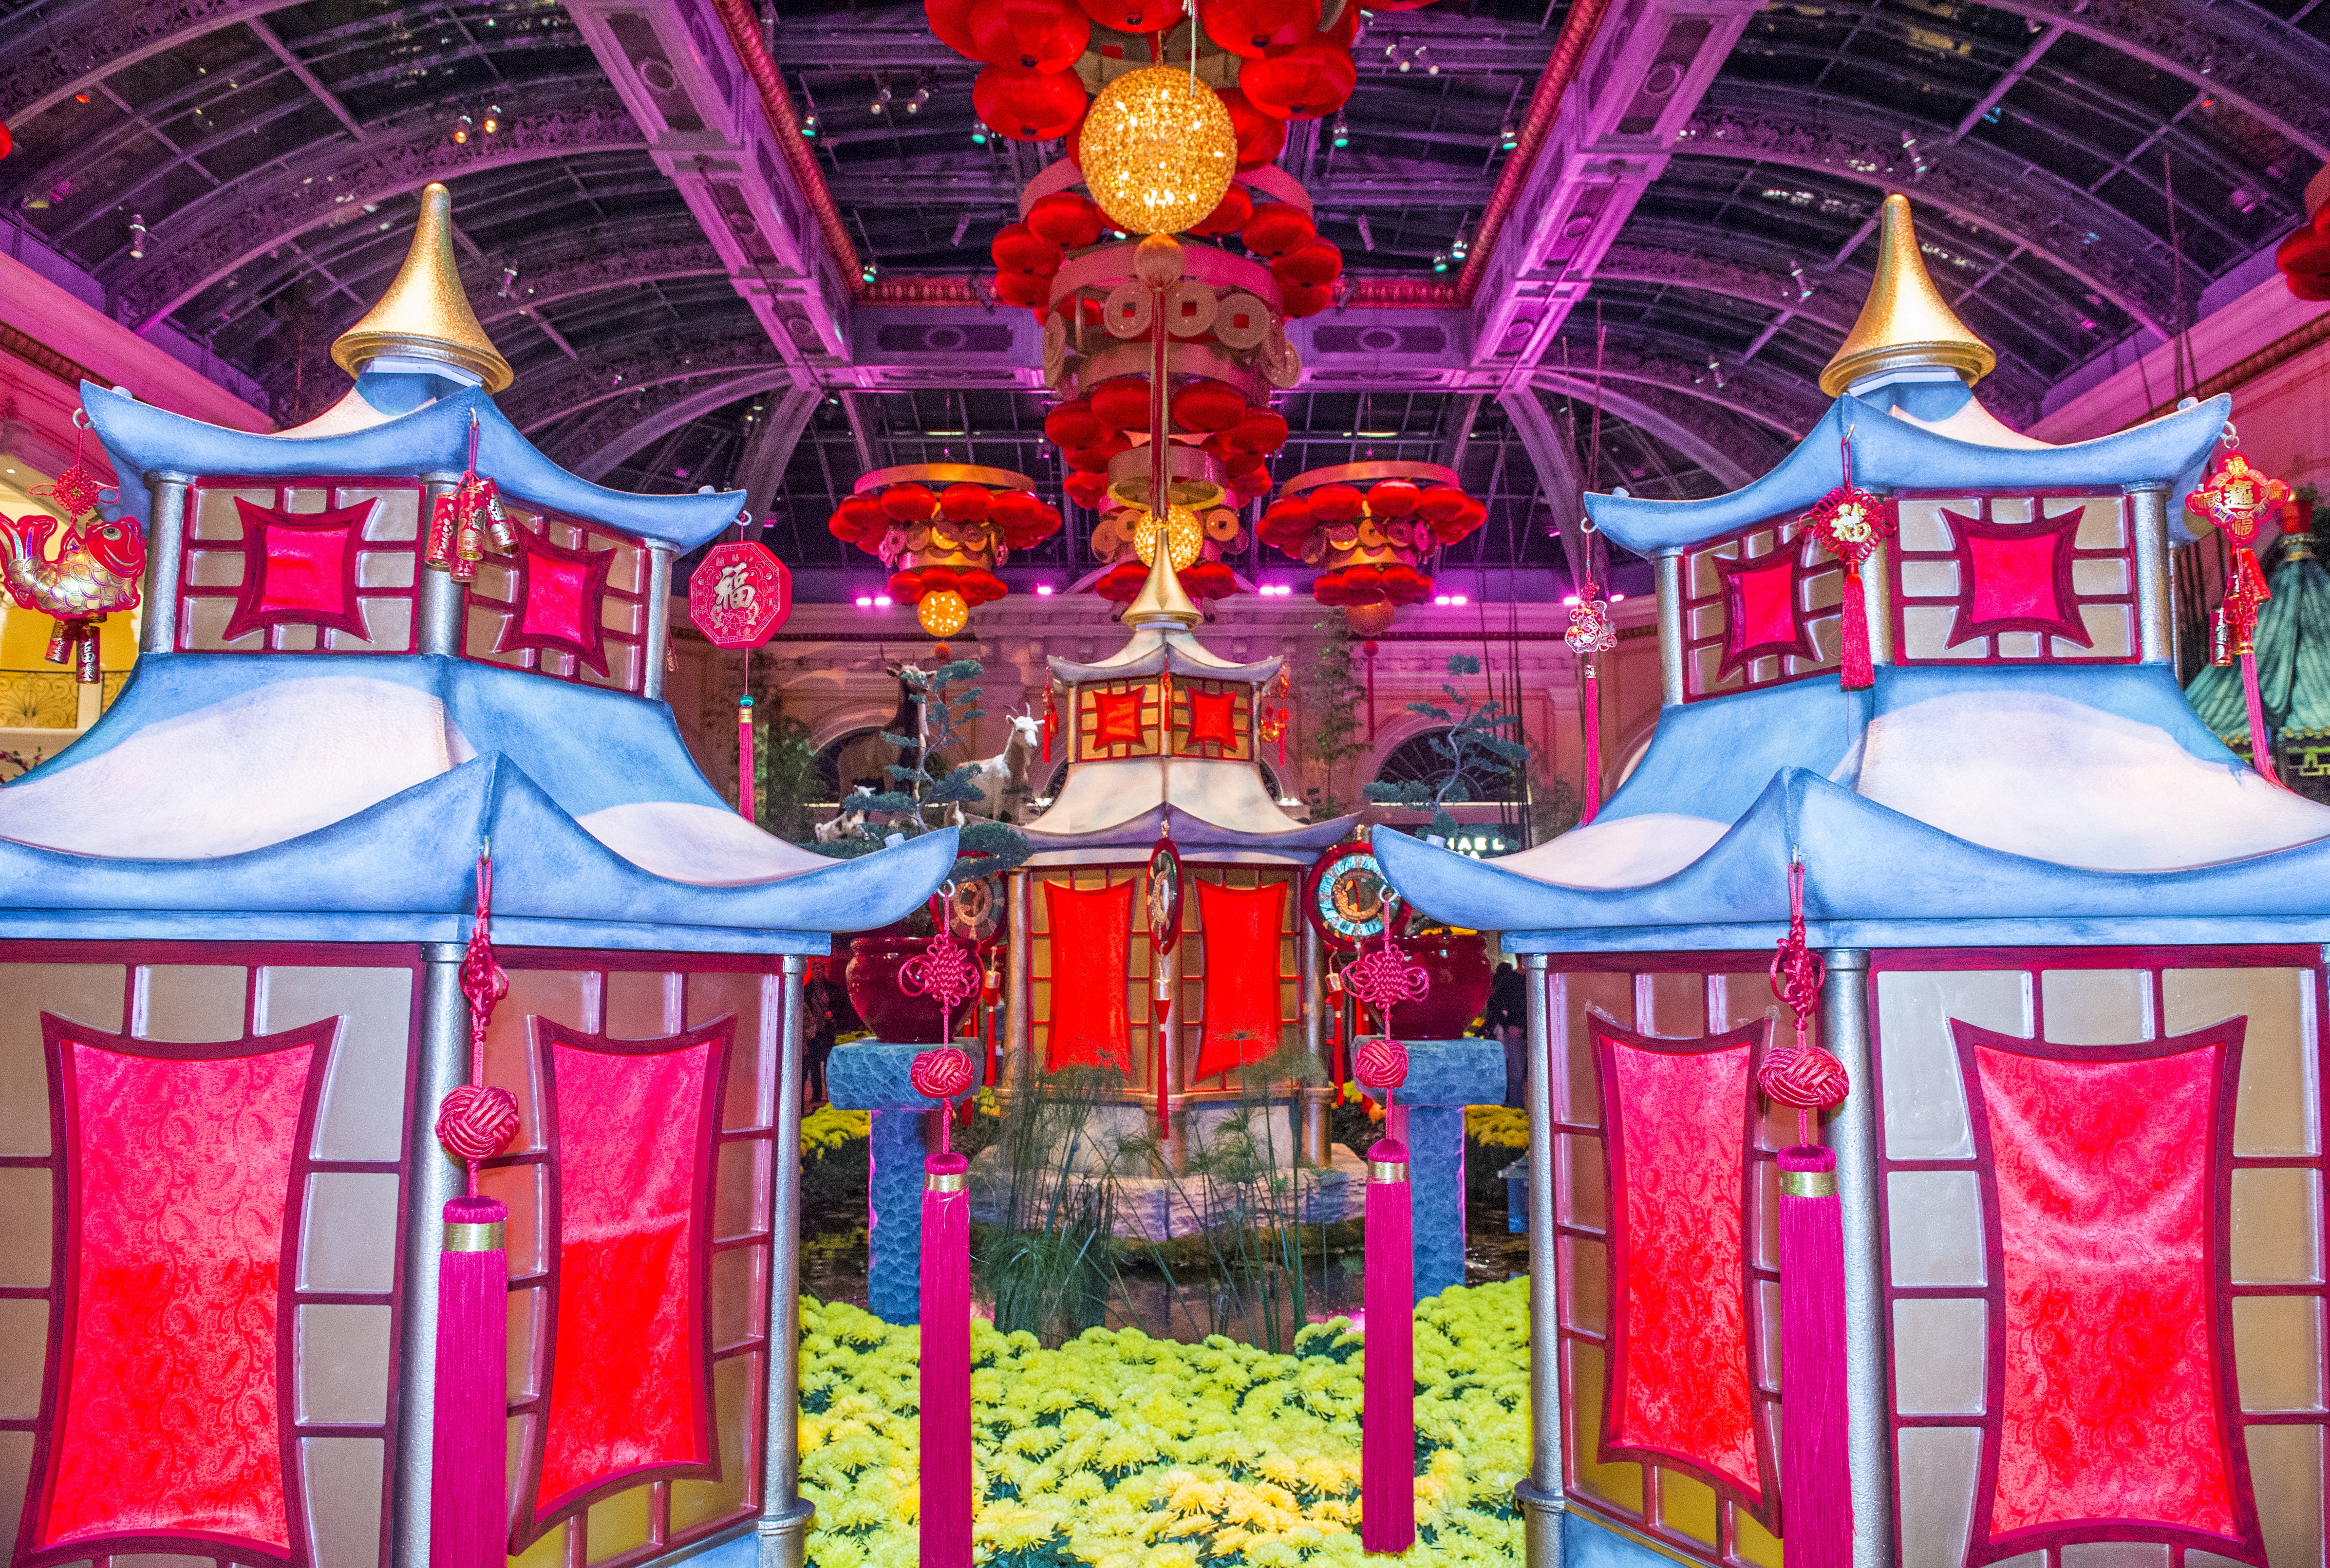 Bellagio, one of the oldest luxury resort and casinos in Las Vegas, celebrated Chinese New Year. Photo: Kobby Dagan / Shutterstock